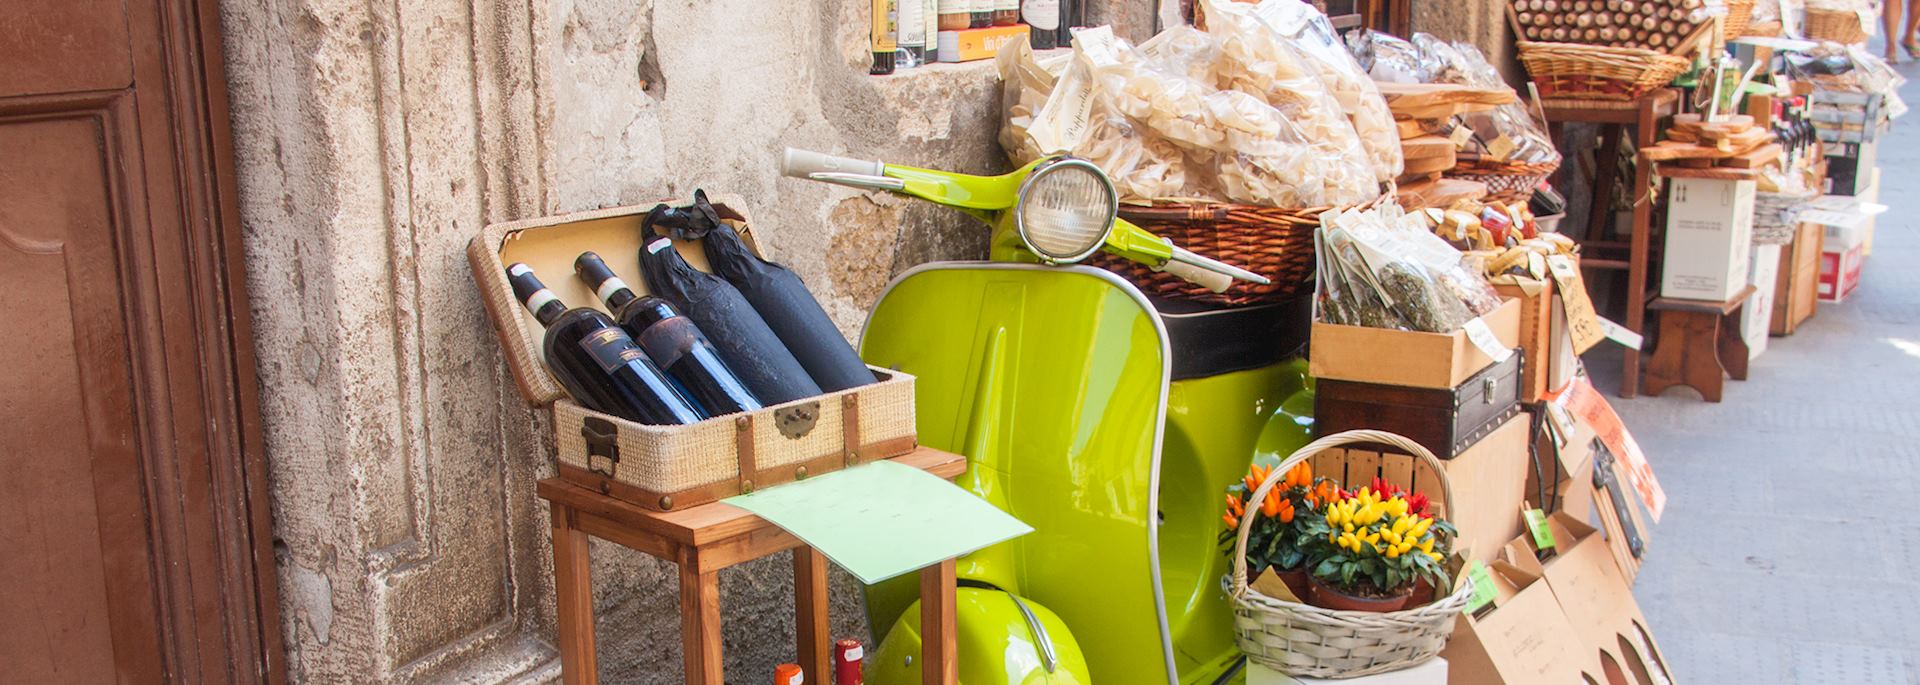 Scooter and local goods, Tuscany, Italy